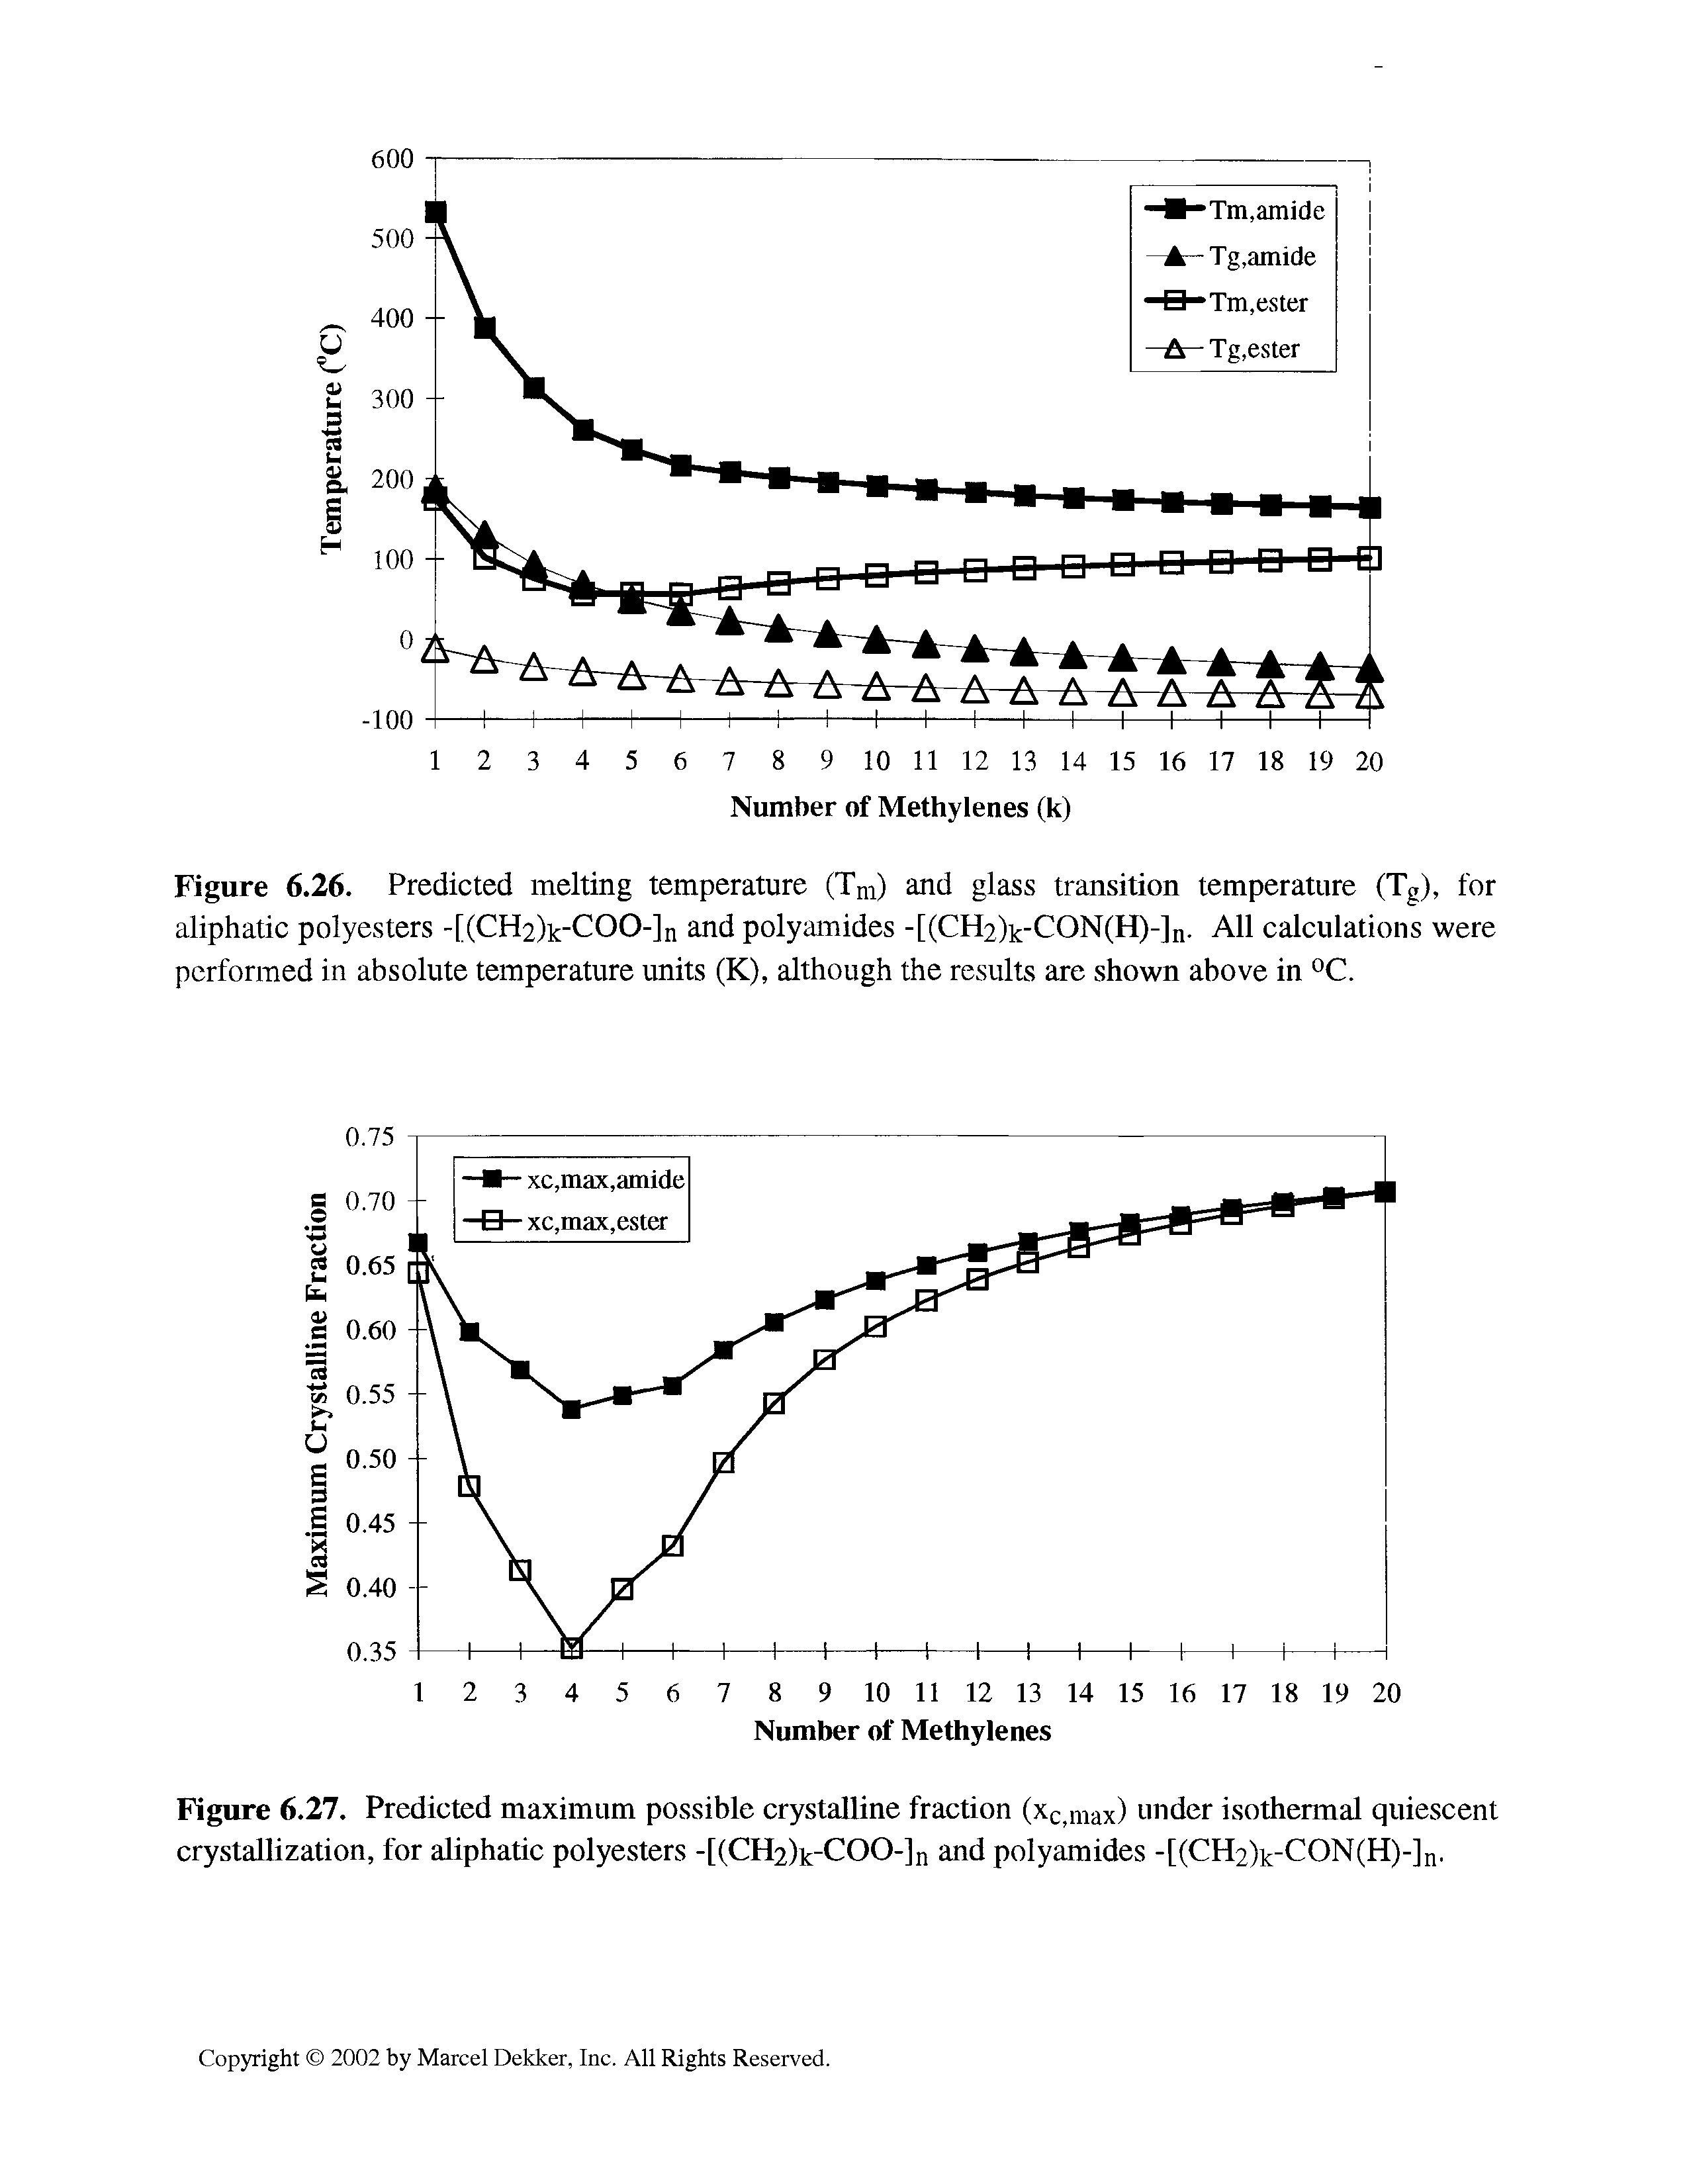 Figure 6.26. Predicted melting temperature (Tm) and glass transition temperature (Tg), for aliphatic polyesters -[(CH2)k-COO-]n and polyamides -[(CH2)k-CON(H)-]n. All calculations were performed in absolute temperature units (K), although the results are shown above in °C.